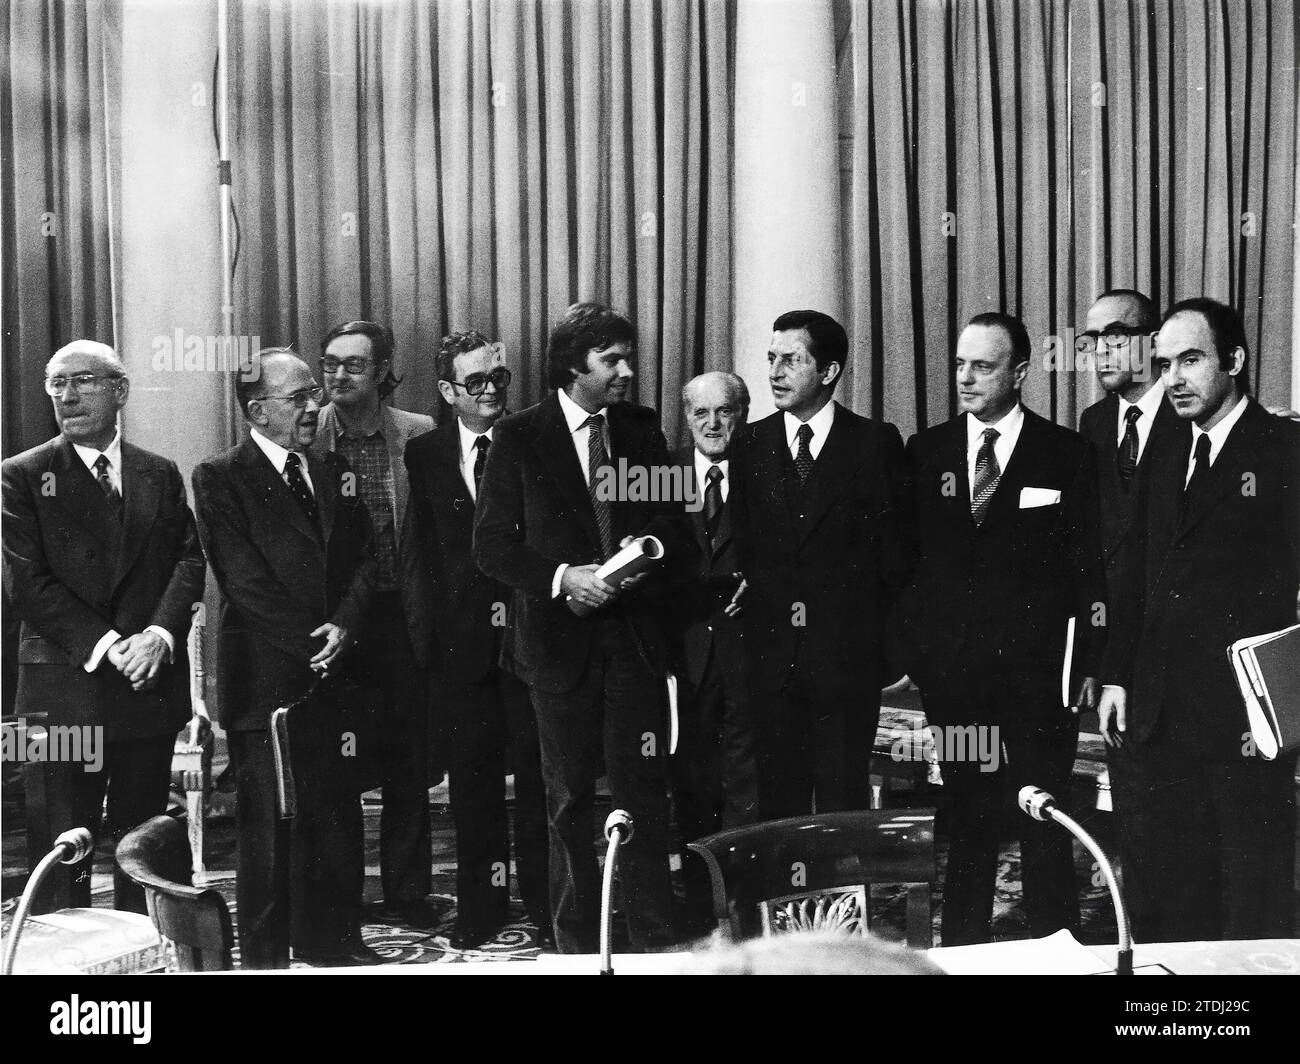 Madrid, 10/25/1977.- The signing of the La Moncloa Pacts contributed to redirecting a climate of concord that had become rarefied in 1977. In the photograph, from left to right: Tierno Galvan, Carrillo, Triginer, Raventós, González , Ajuriaguerra, Adolfo Suárez, Fraga, Calvo Sotelo and Miquel Roca. Credit: Album / Archivo ABC Stock Photo